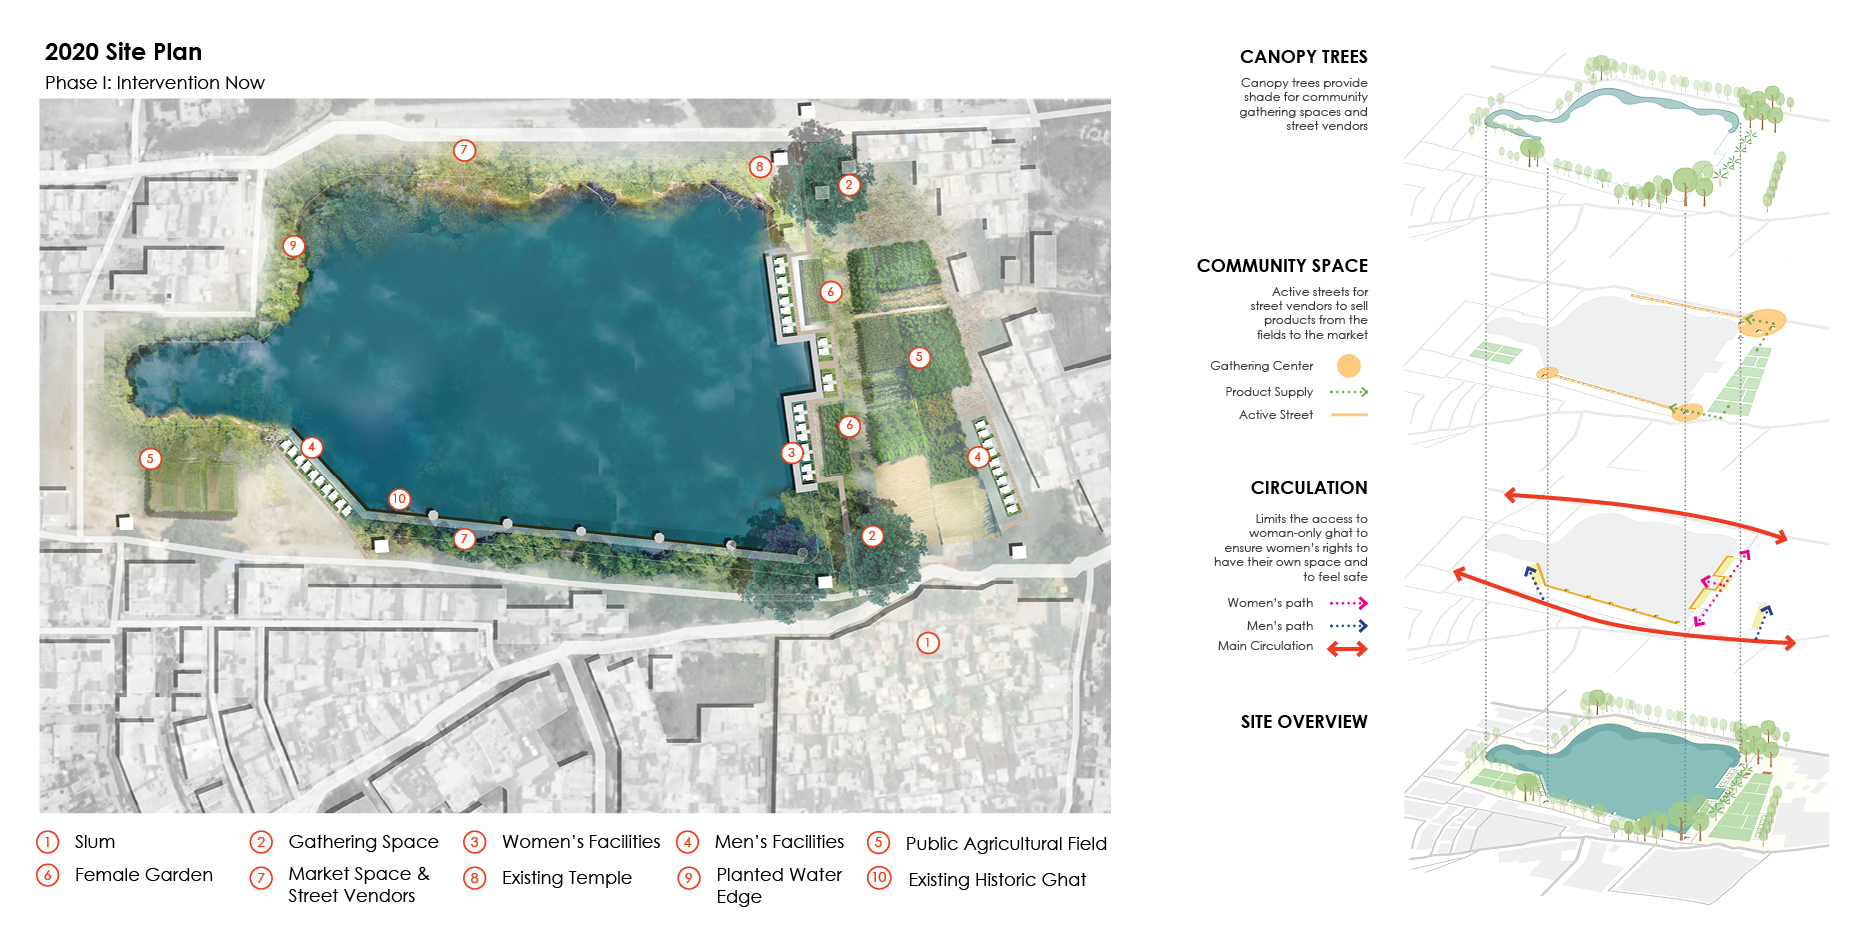 2020 SITE PLAN AND DIAGRAMS